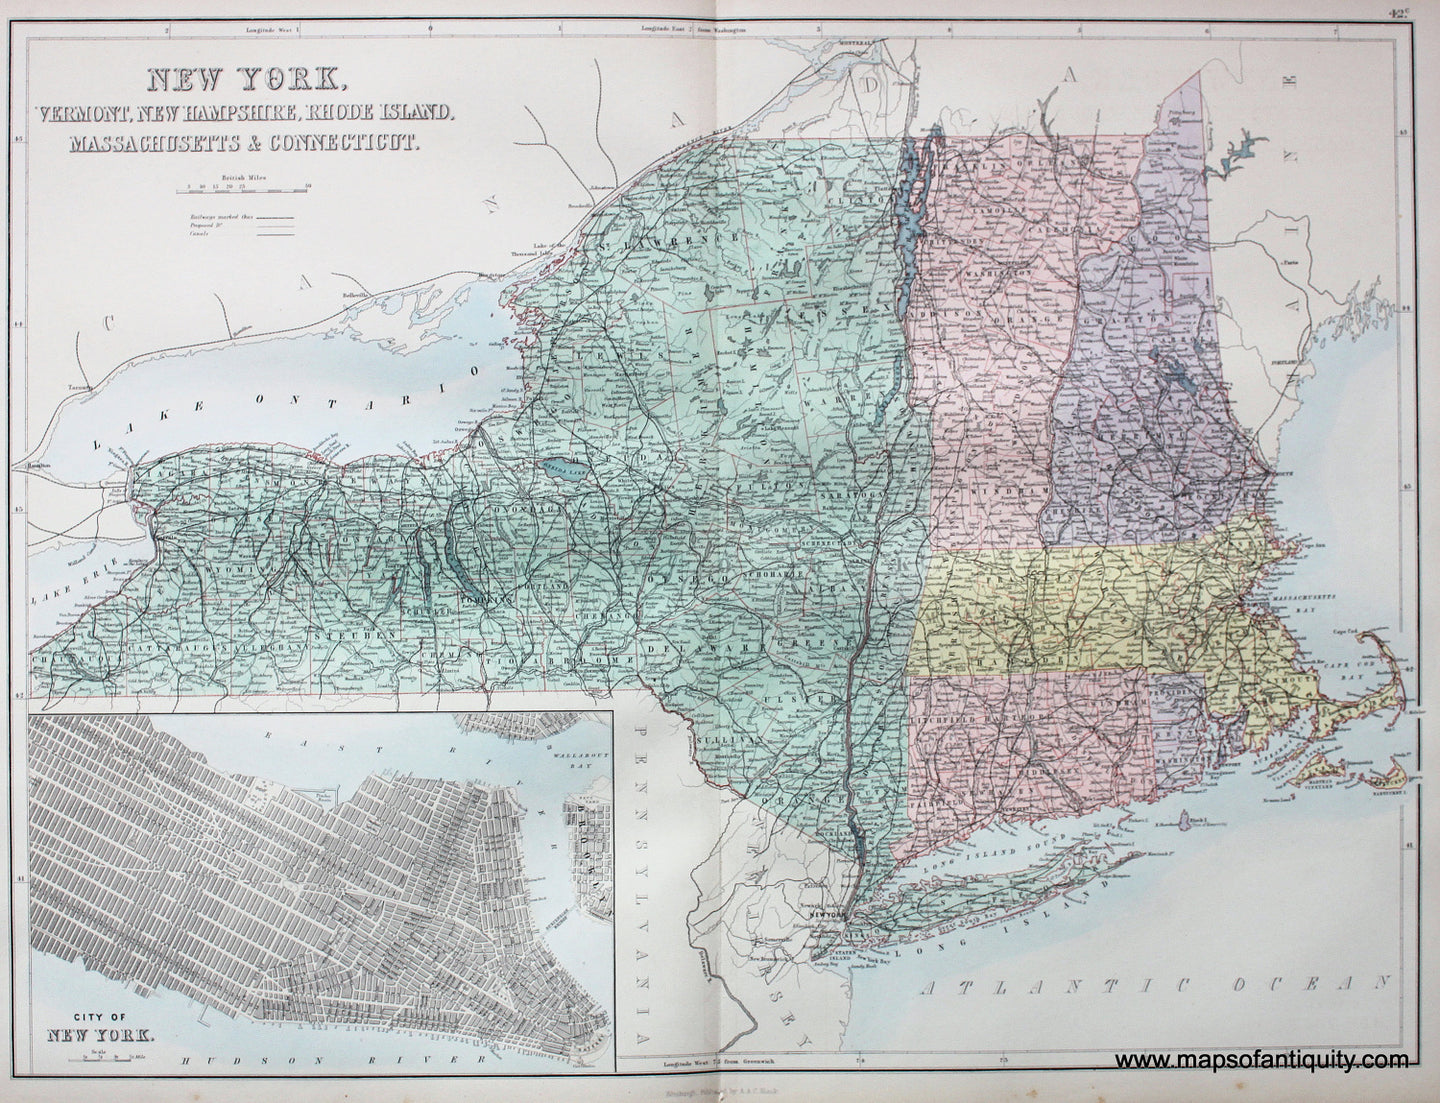 Antique-printed-color-Map-New-York-Vermont-New-Hampshire-Rhode-Island-Massachusetts-&-Connecticut-**********-United-States-New-York-1879-Black-Maps-Of-Antiquity